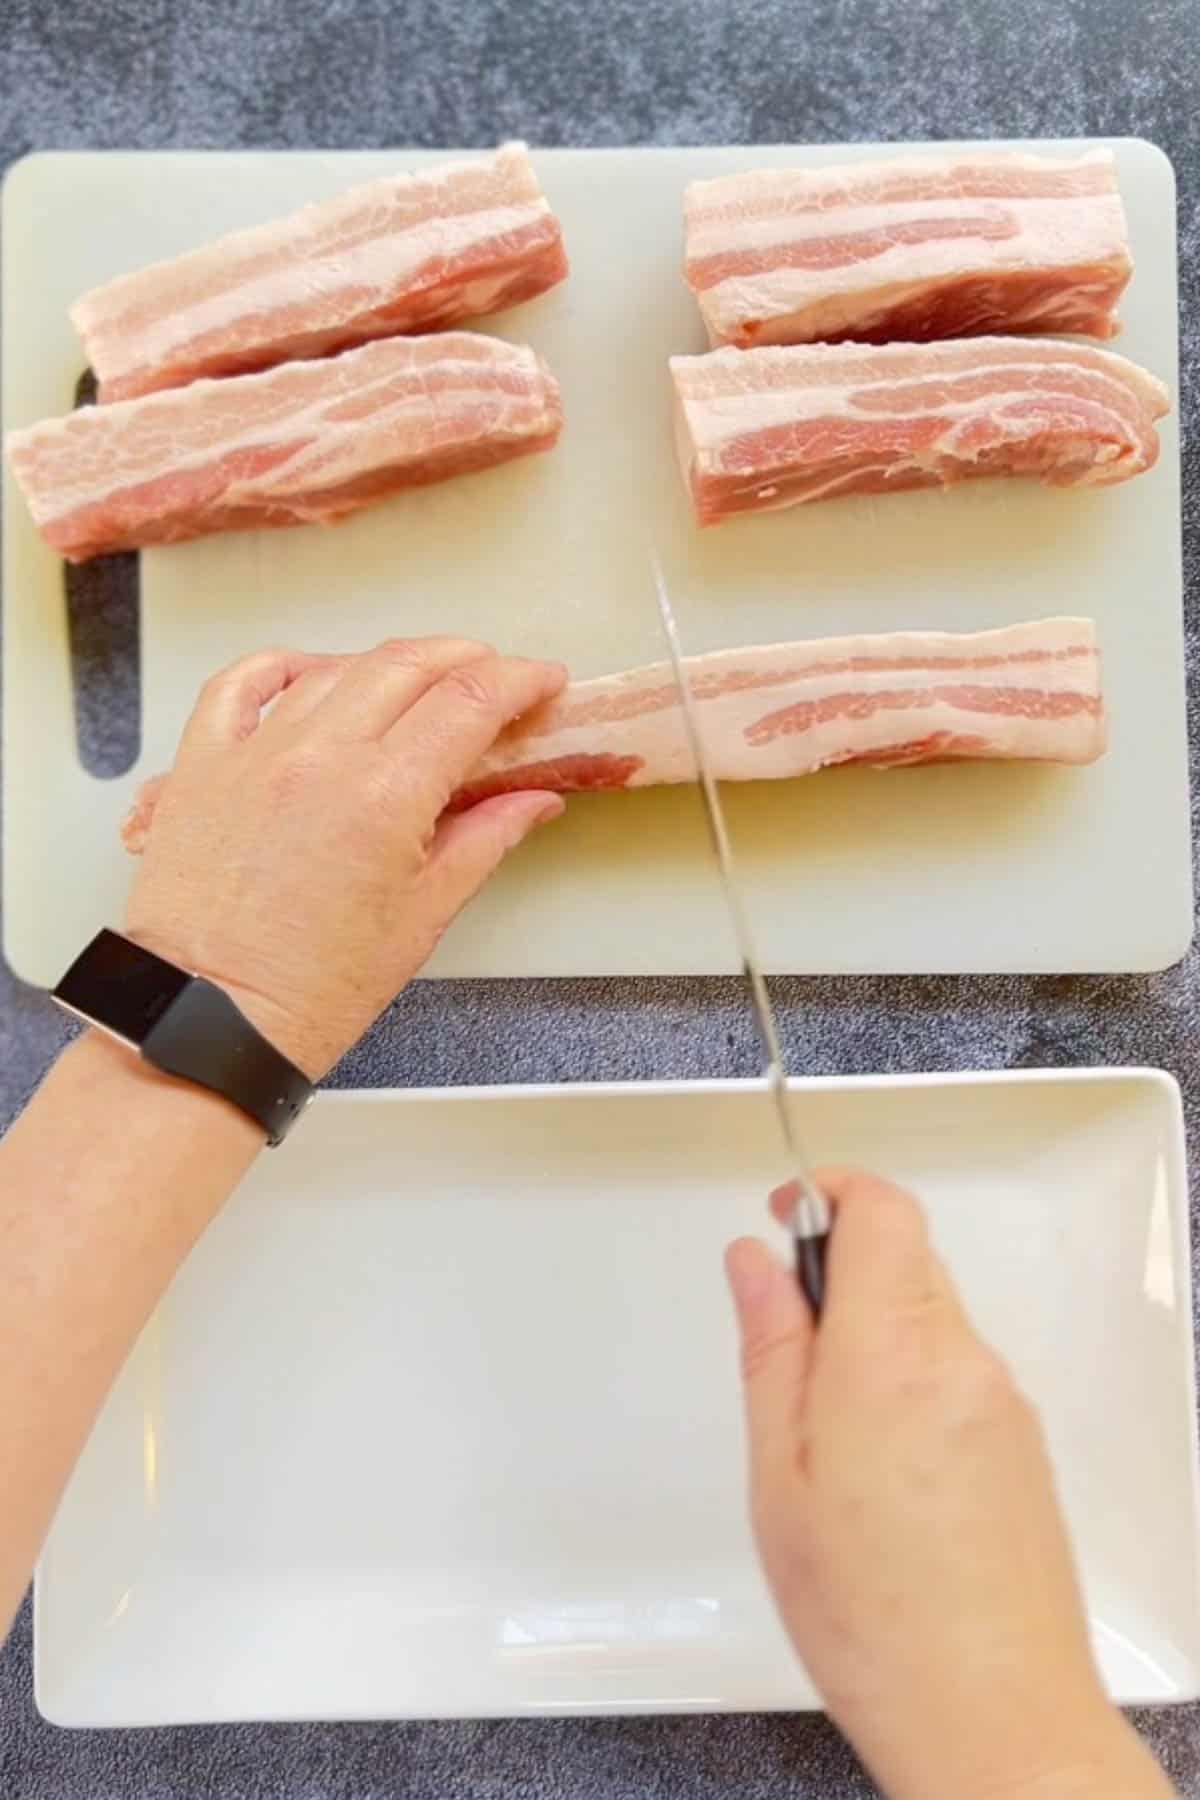 A person using an air fryer to cook pork belly slices.